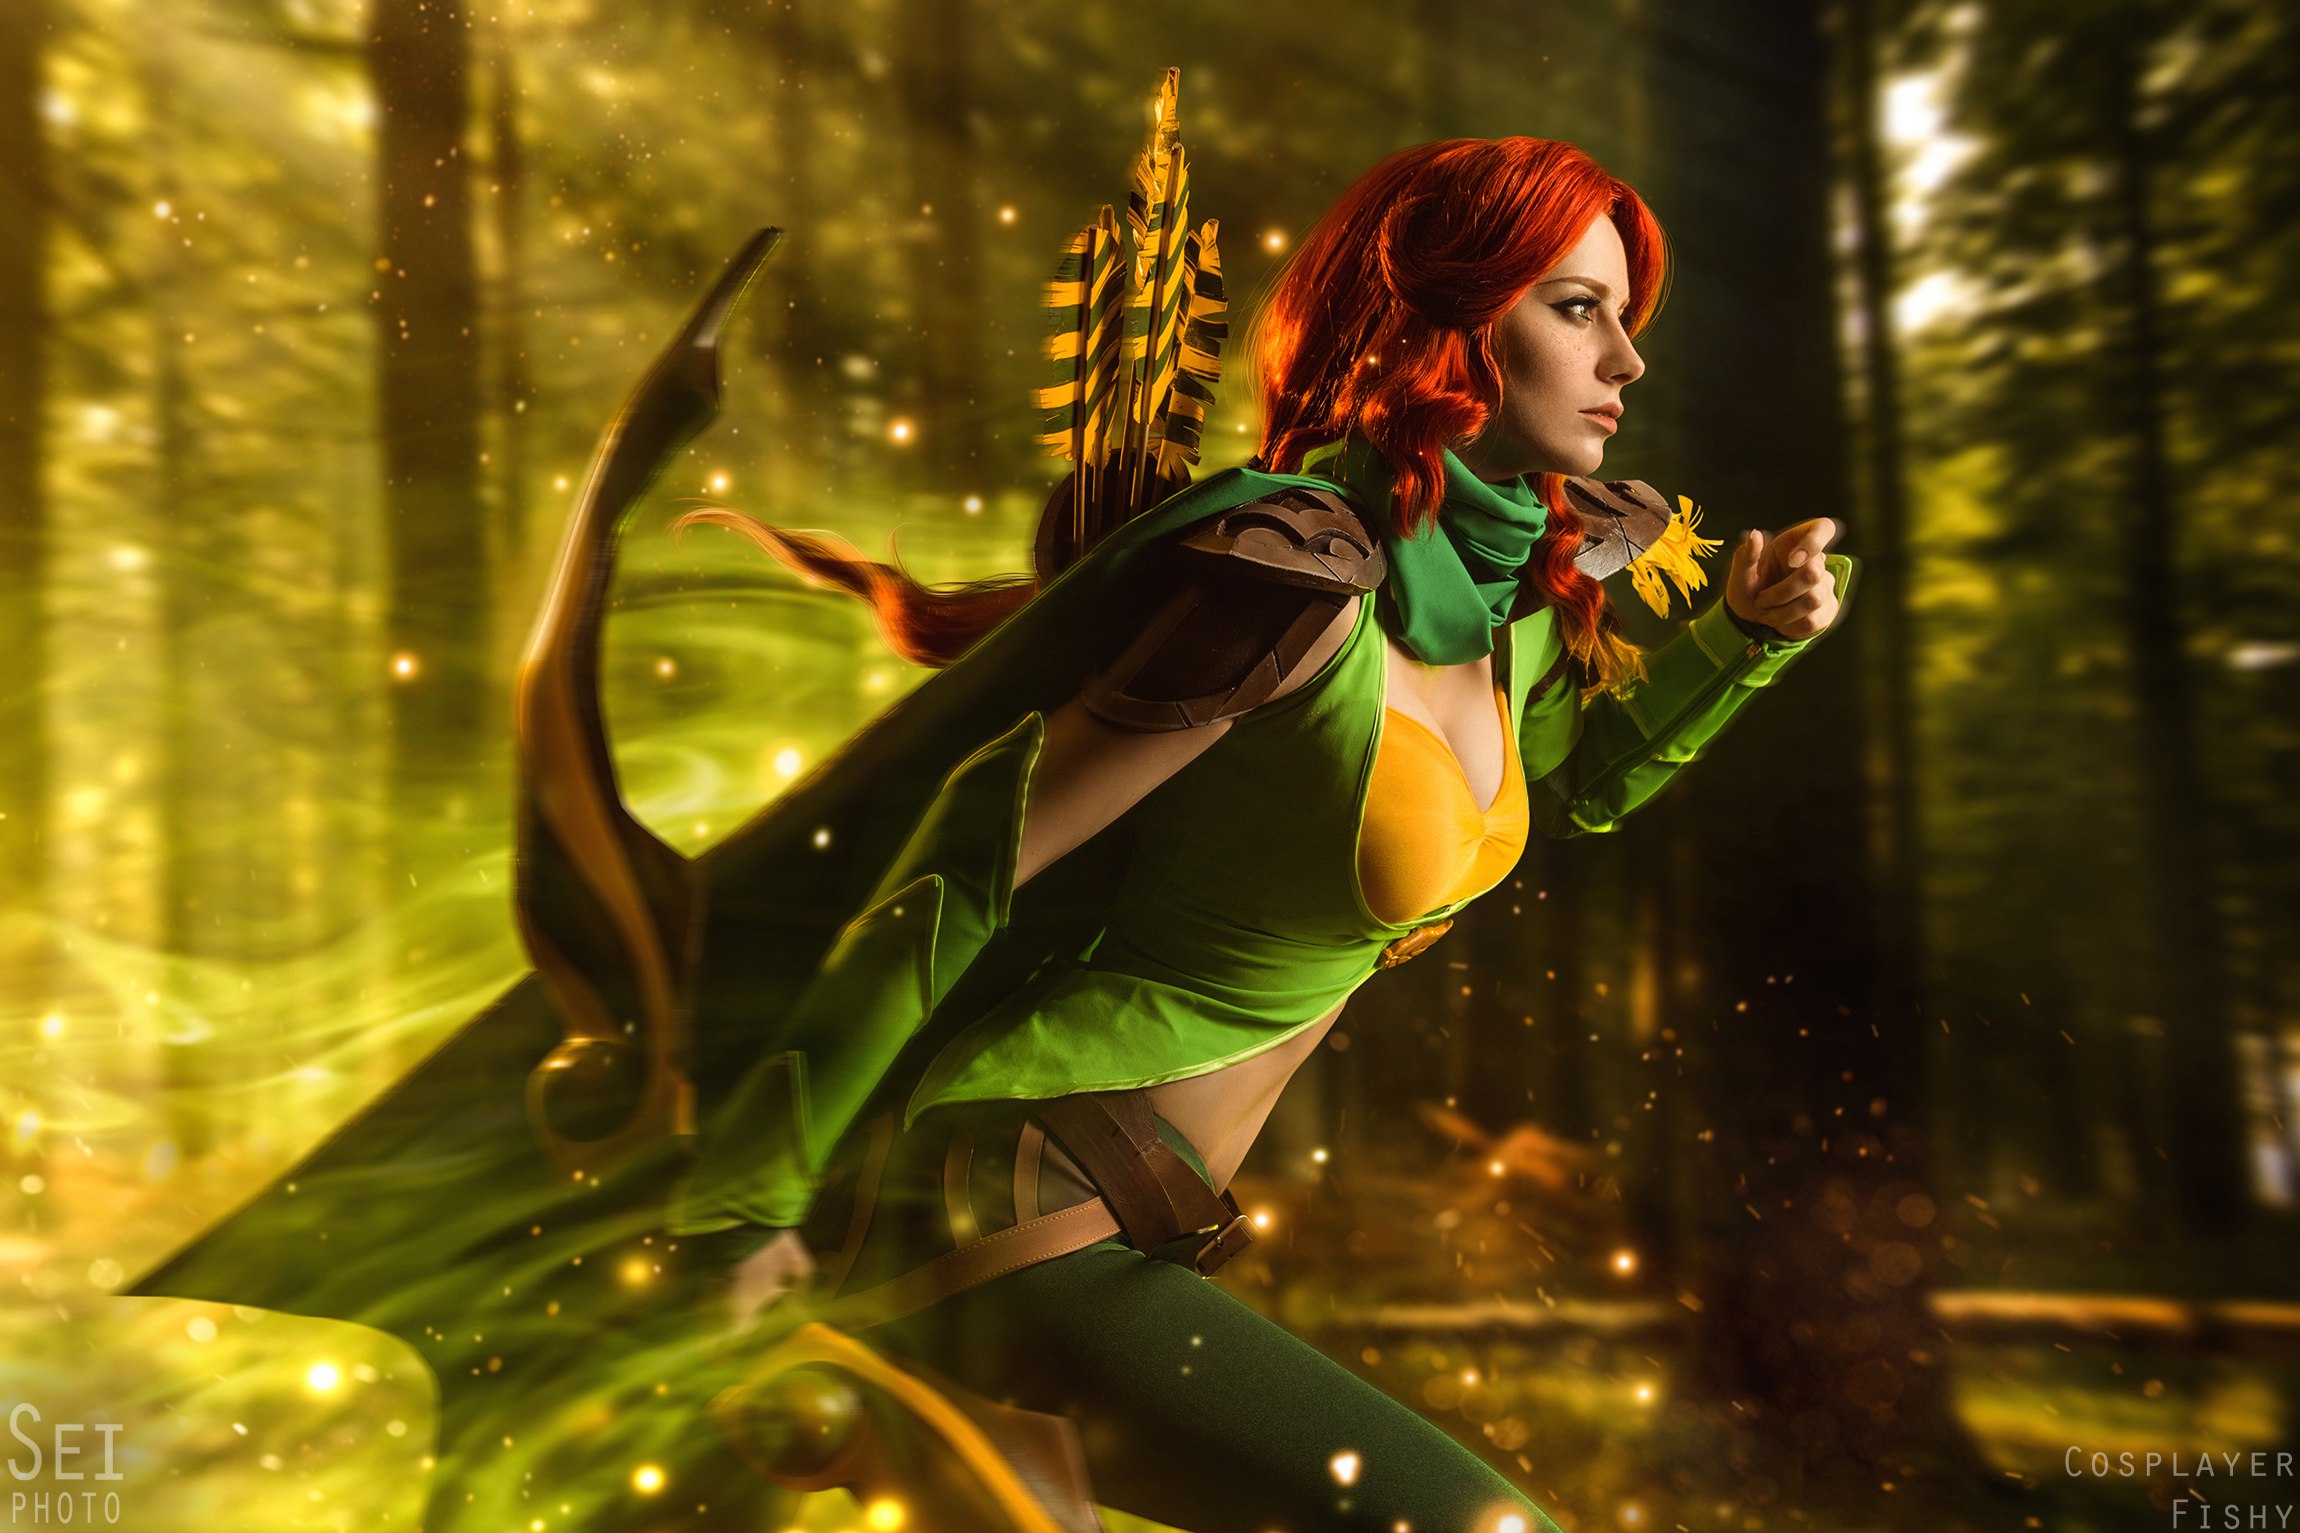 cosplay wallpaper hd,cg artwork,green,fictional character,mythology,forest